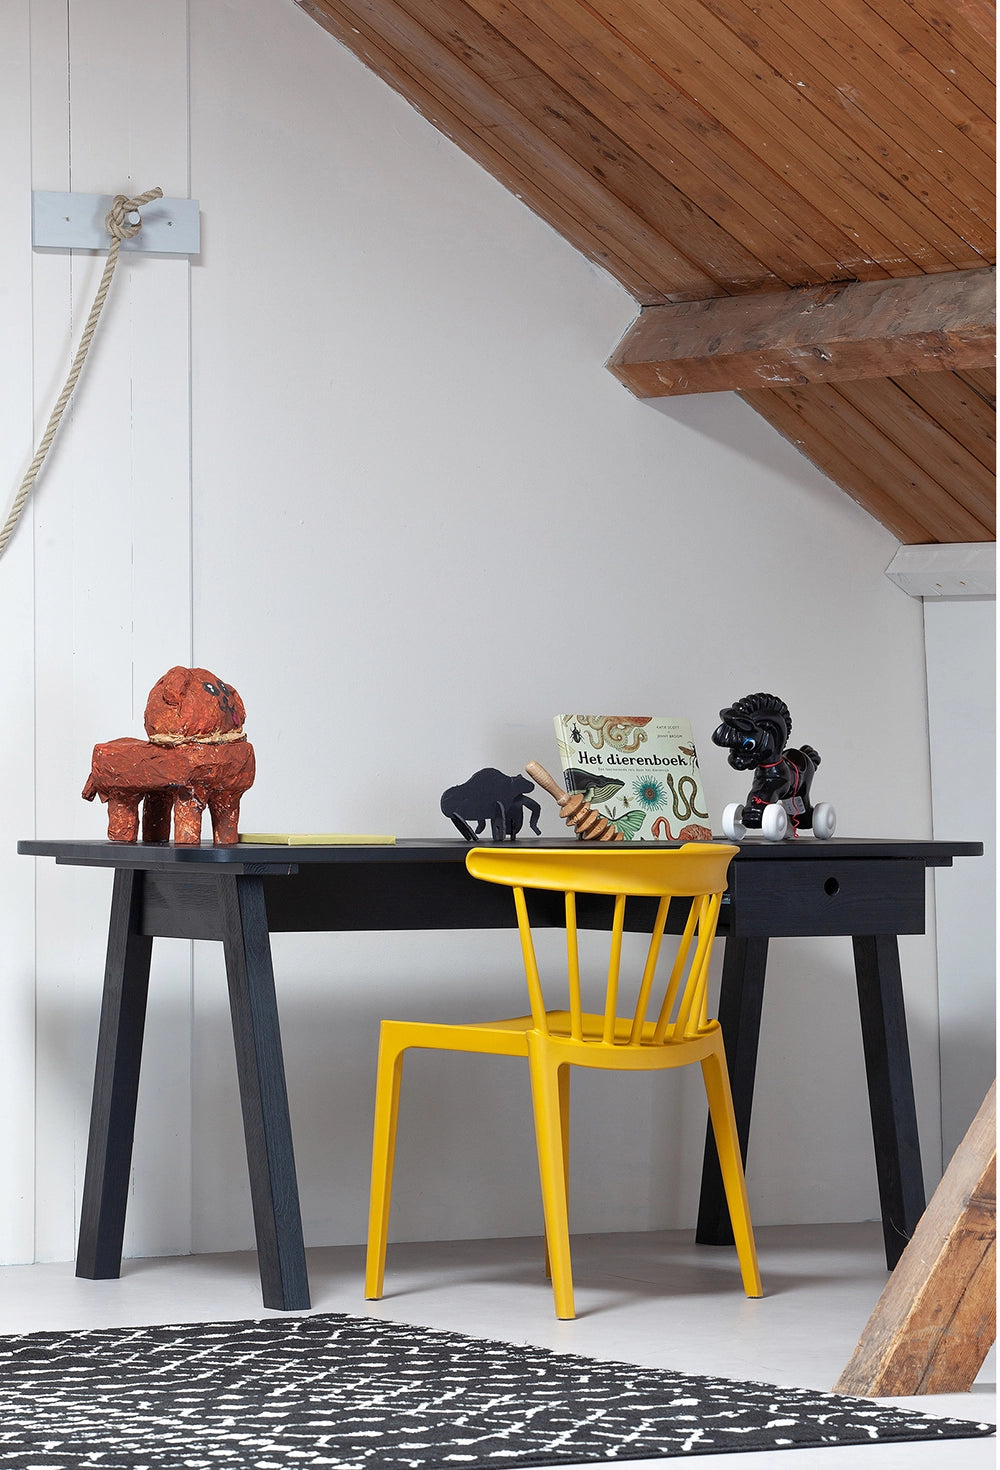 Ash Polypropylene Chair Ochre 4 with Rectangular Black Table and Animal Figurine in Attic Bedroom Setting